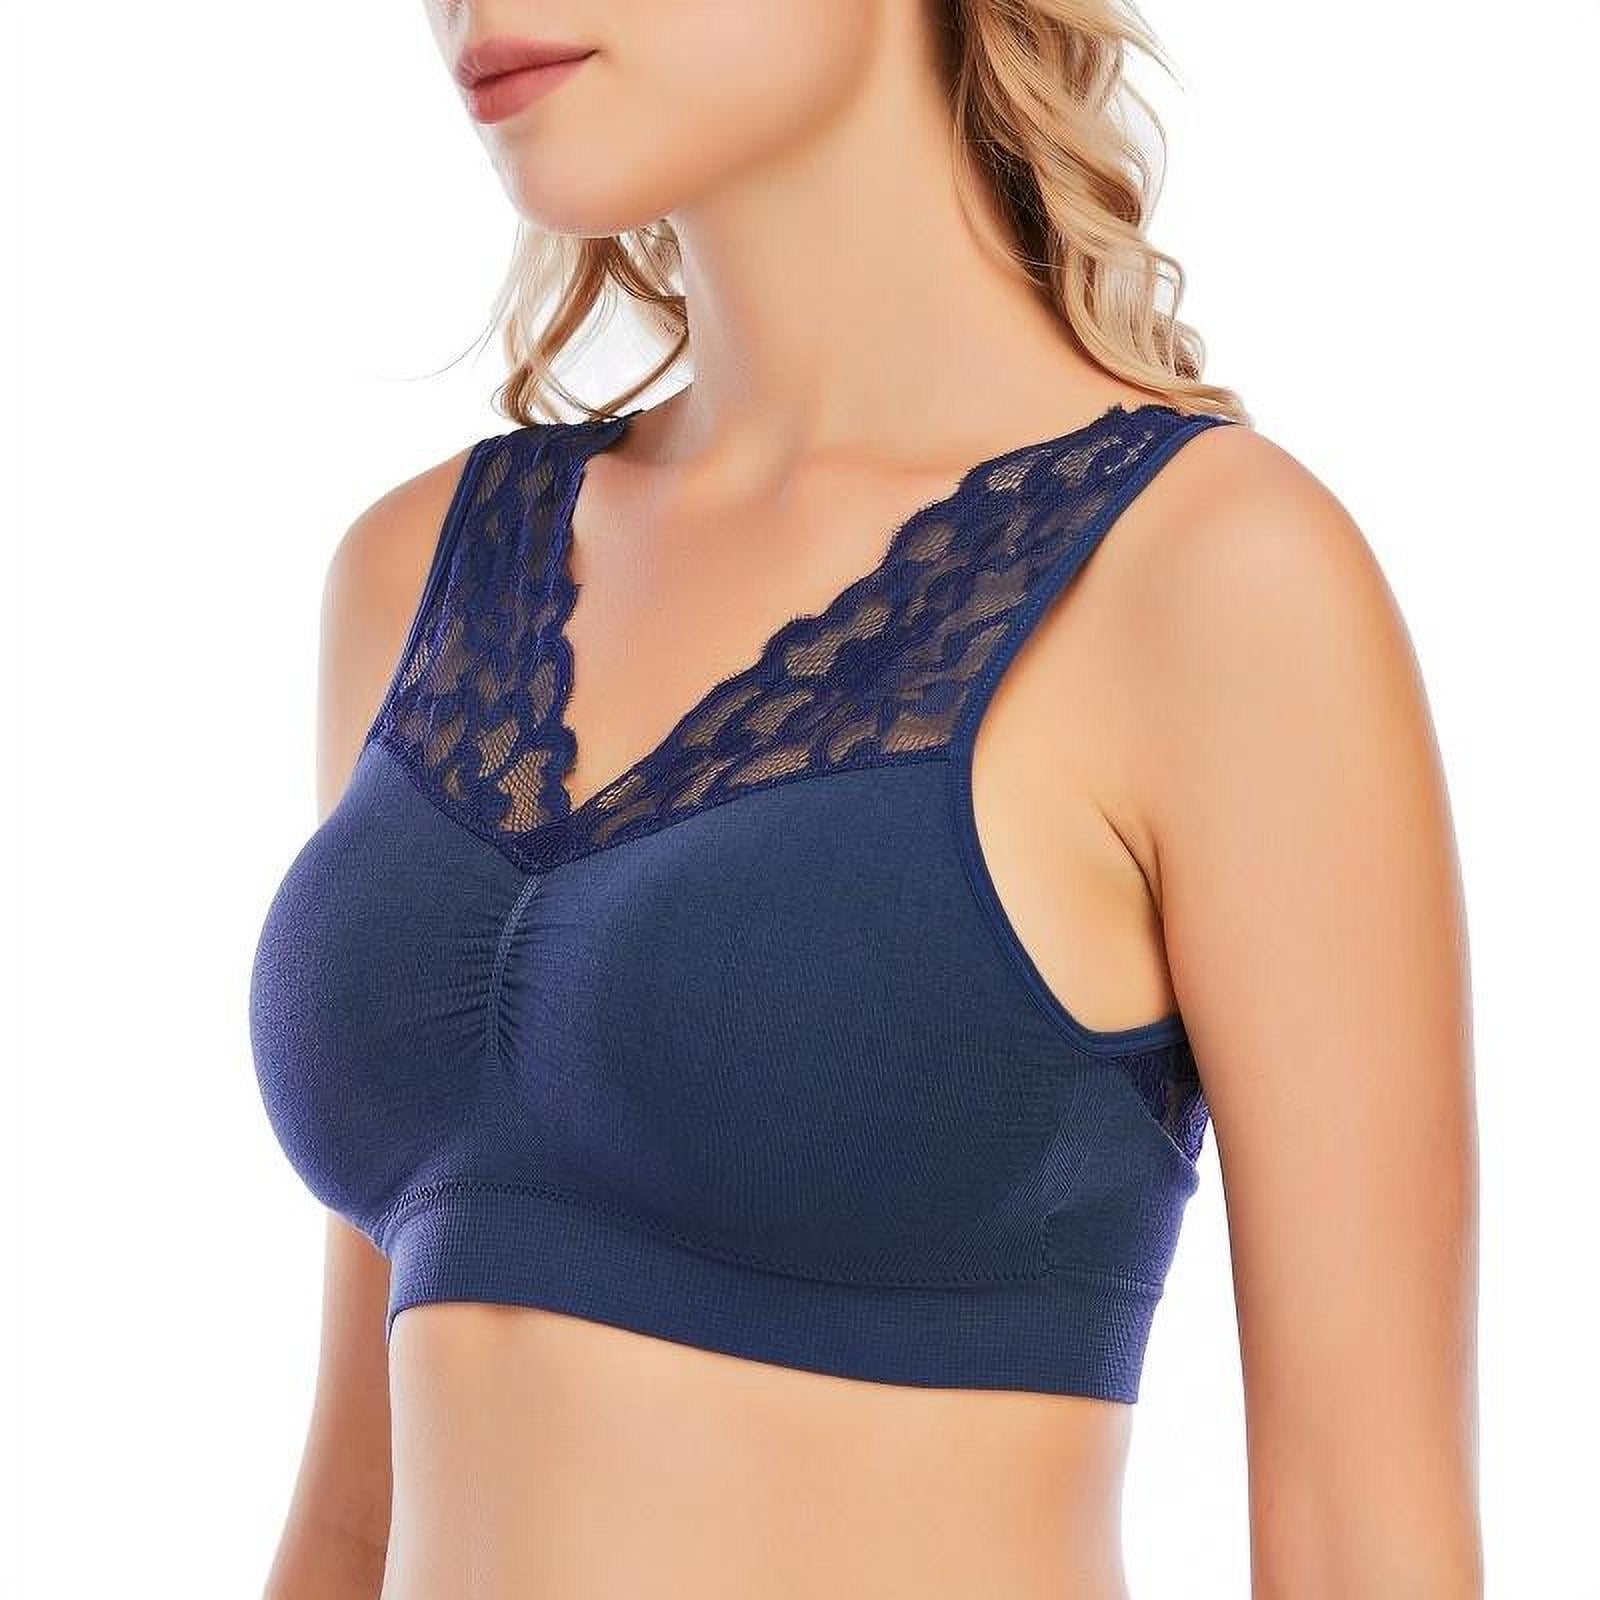 Sexy V Neck Lace Bras For Women, Brassiere Push Up Padded Bra Seamless  Comfort Bralette, Breathable Fitness Gym Bra Large Size, Navy Blue, XL